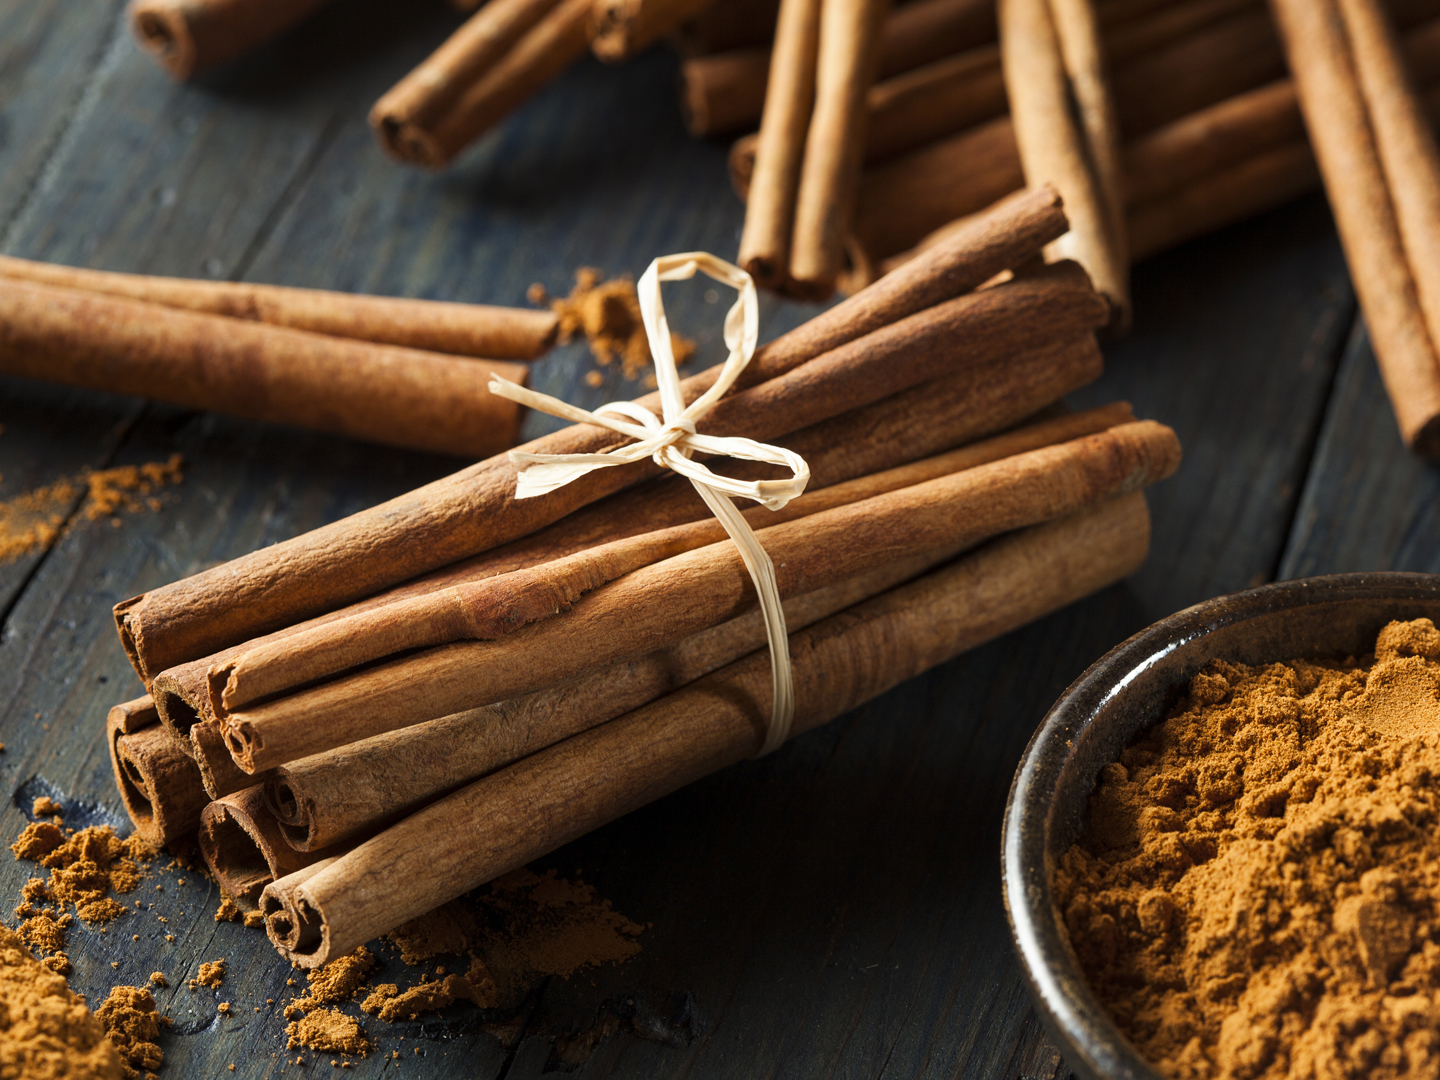 Video: Cinnamon - Spices in the Kitchen | Dr. Weil